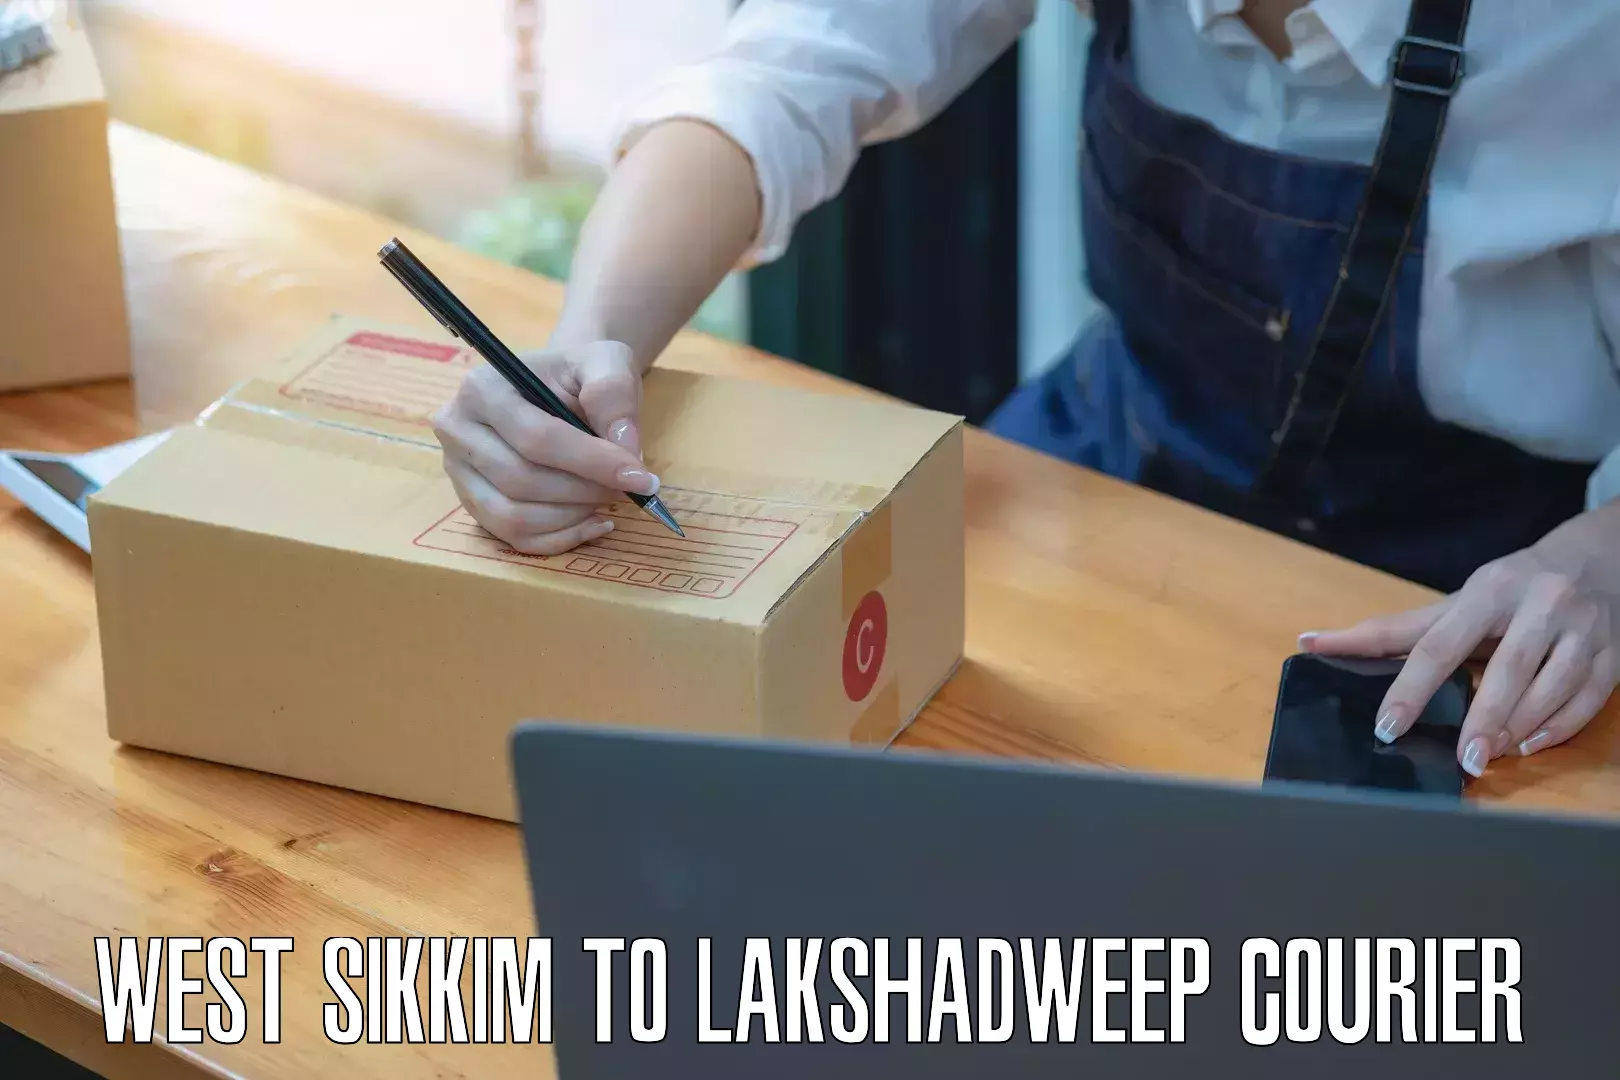 Customer-focused courier West Sikkim to Lakshadweep